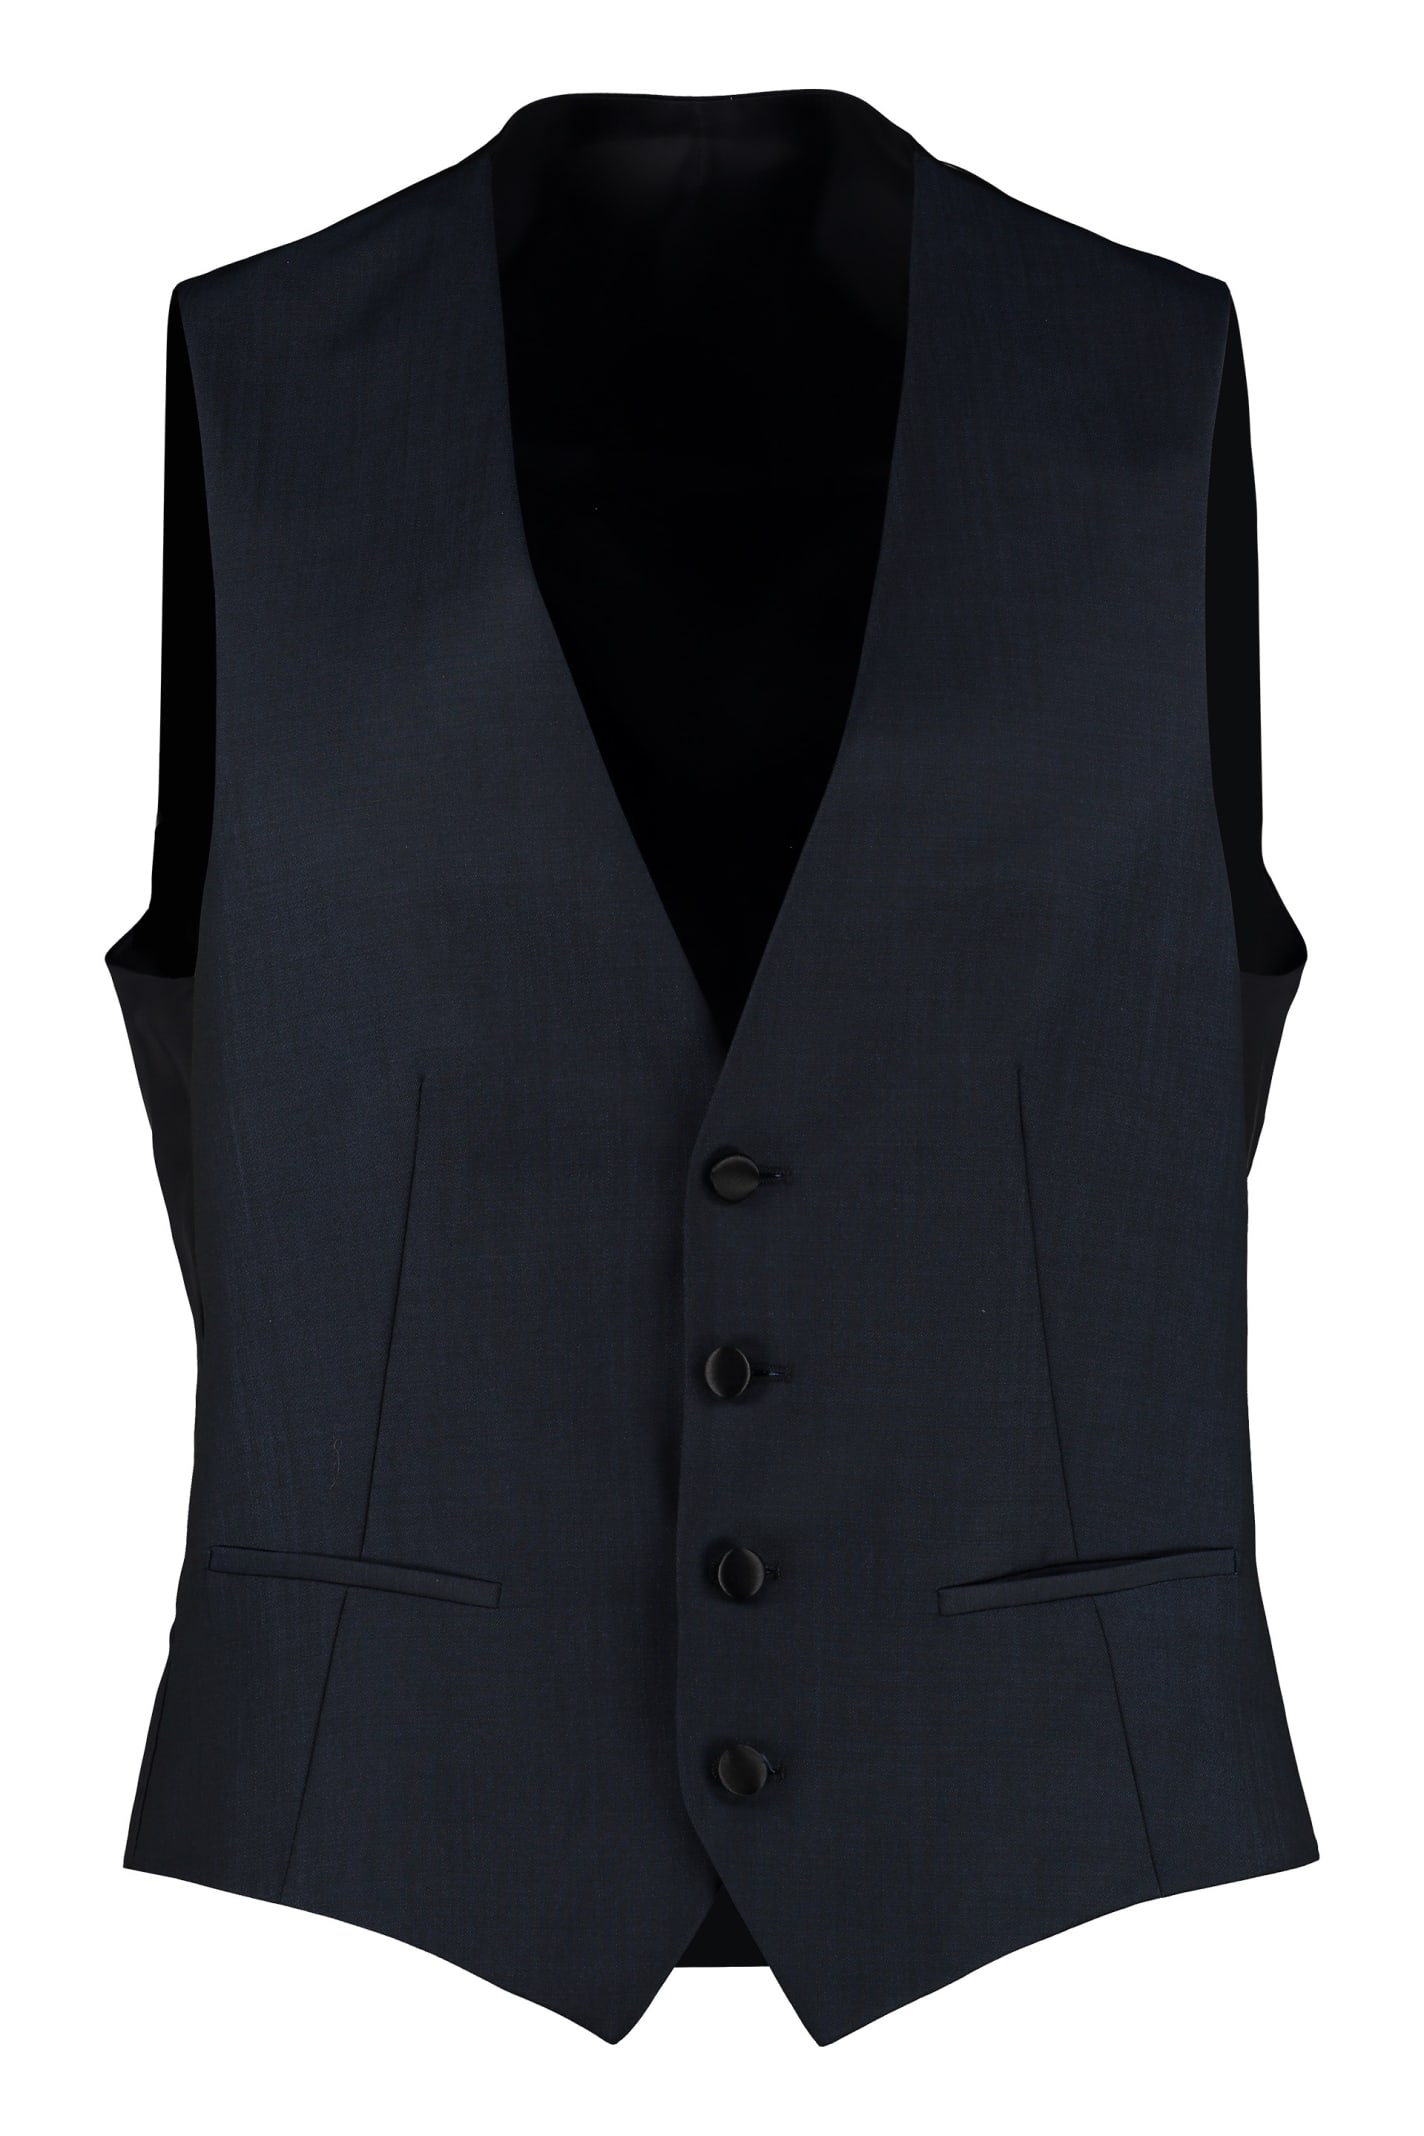 Z Zegna Mohair And Wool Vest